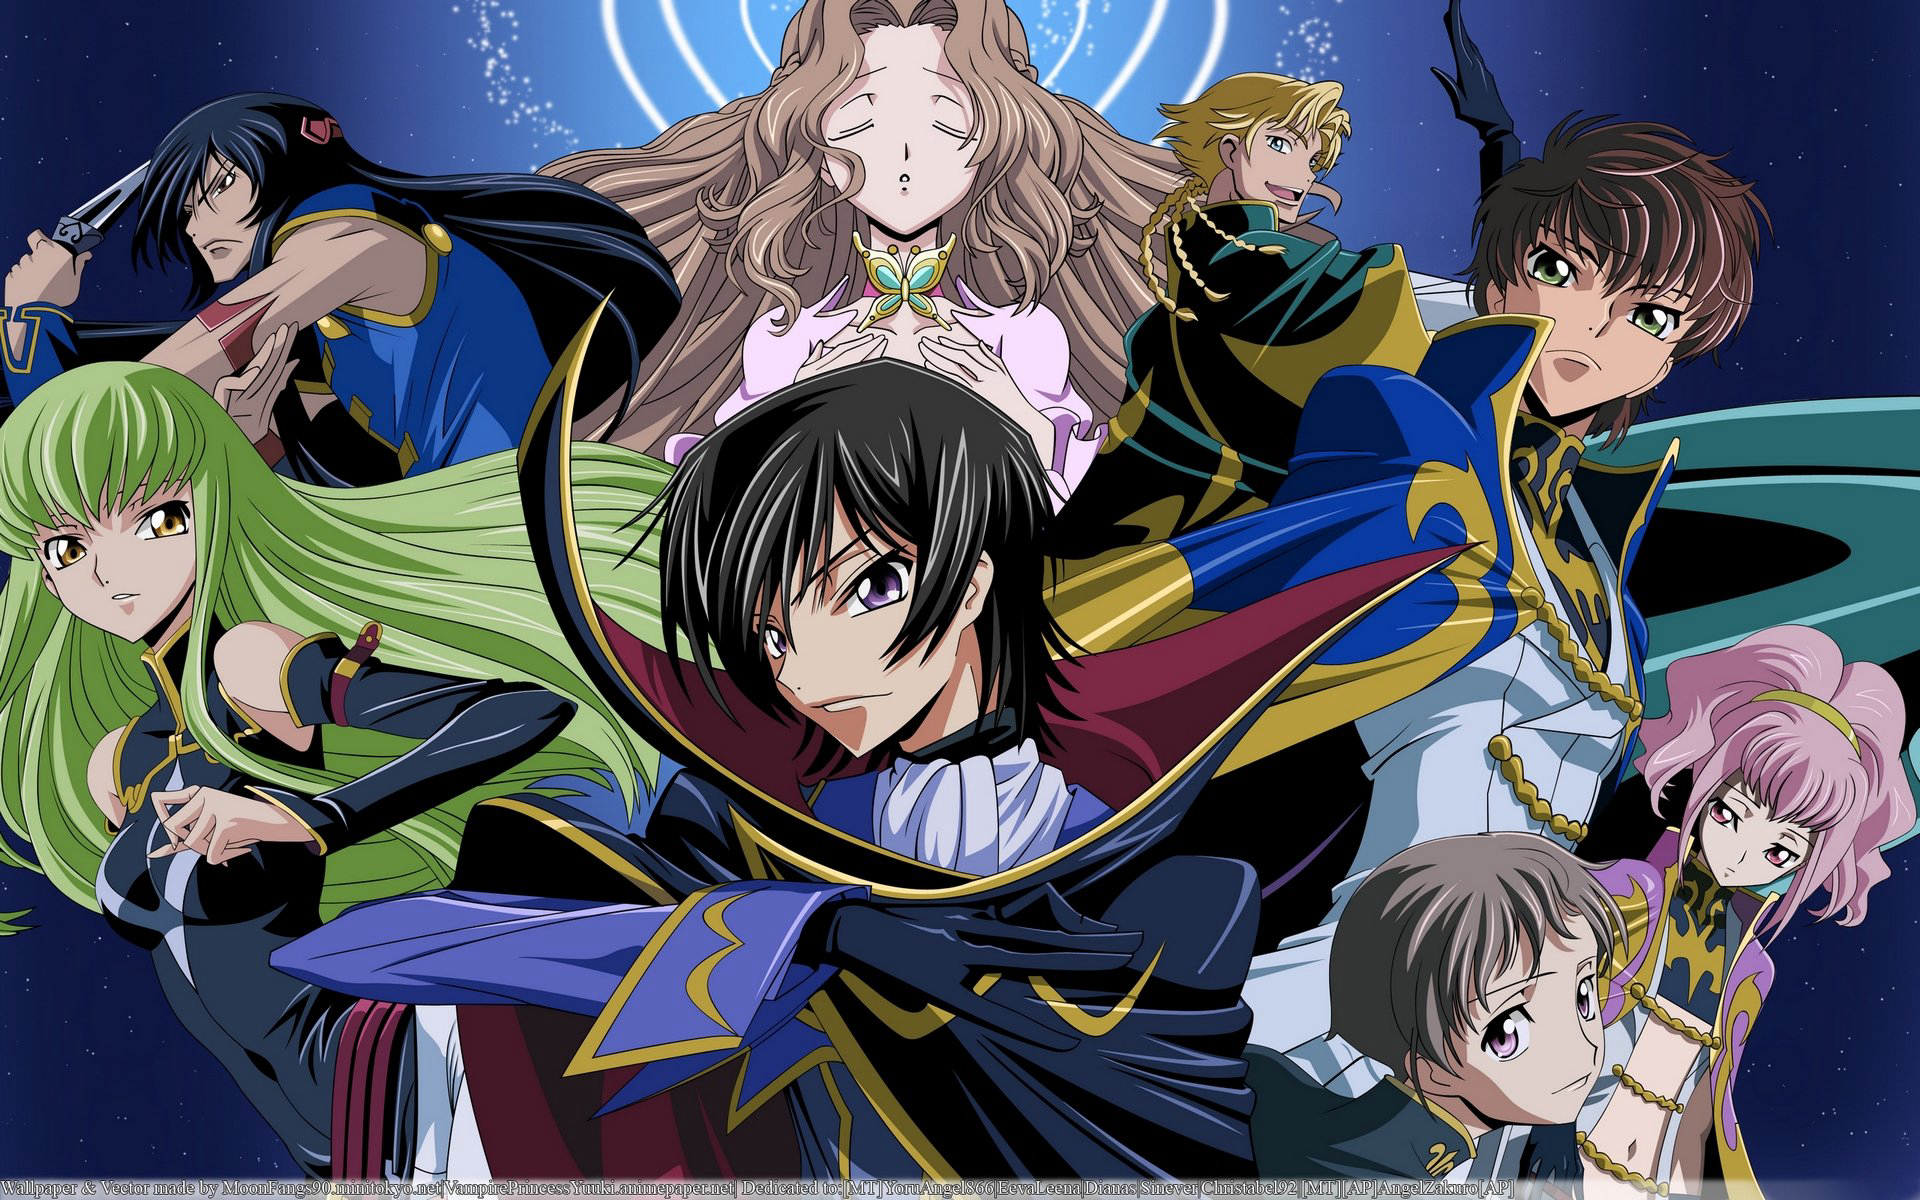 Code Geass: Lelouch of the Rebellion - Rebellion Con đường tạo phản - Bstation Tập 1